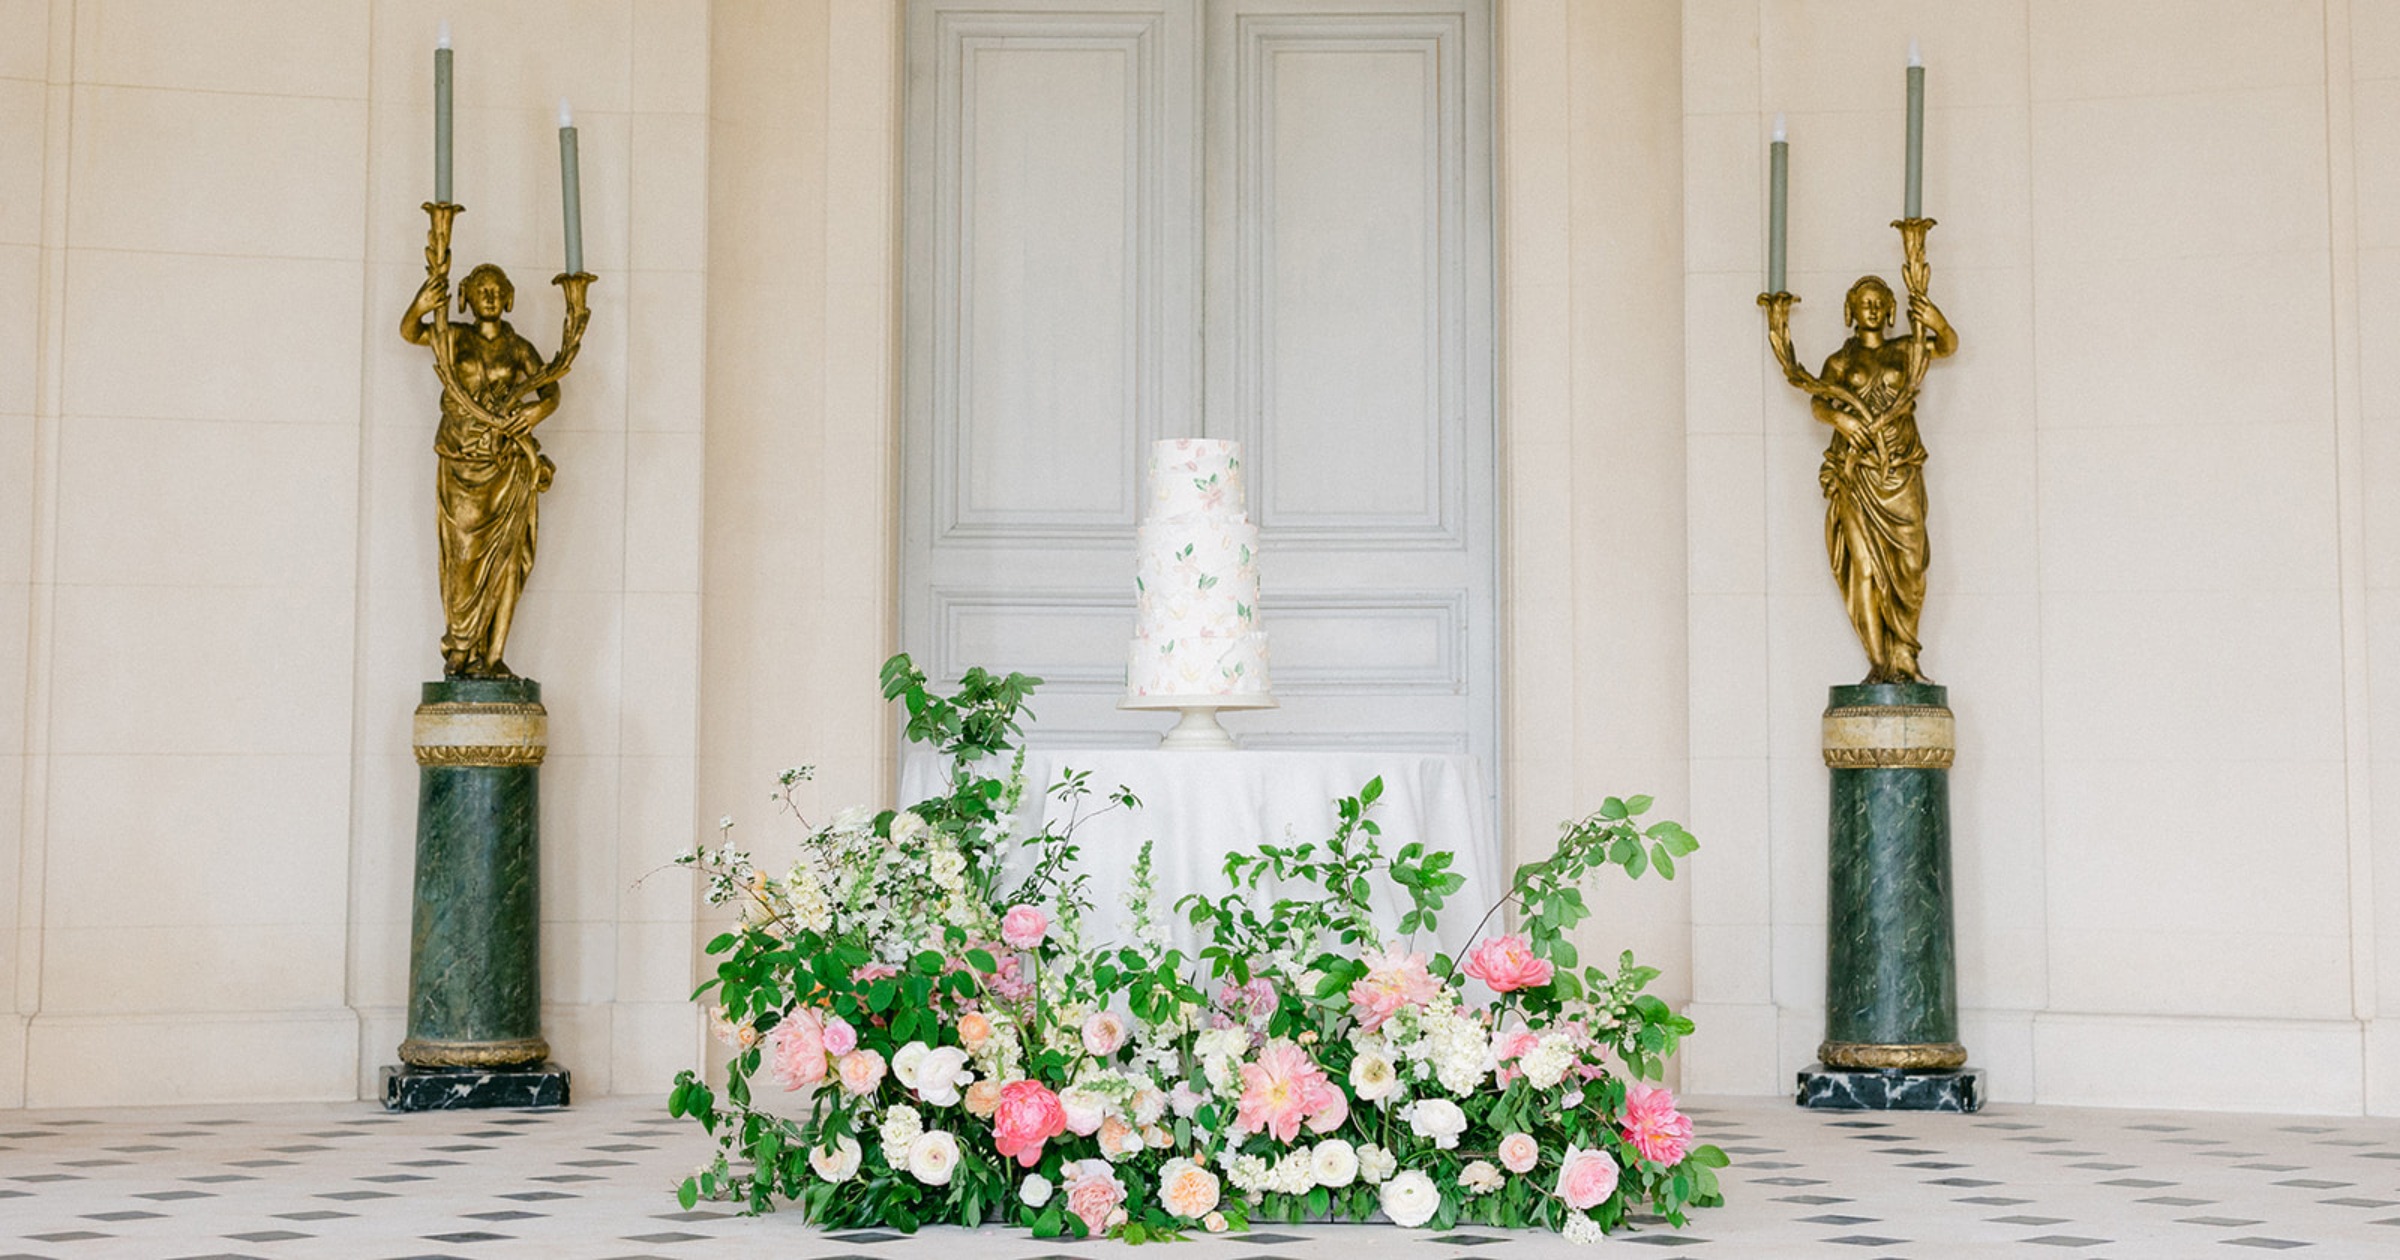 Planning A Destination Wedding Doesn’t Have To Be Difficult, Just Ask Cher Amour